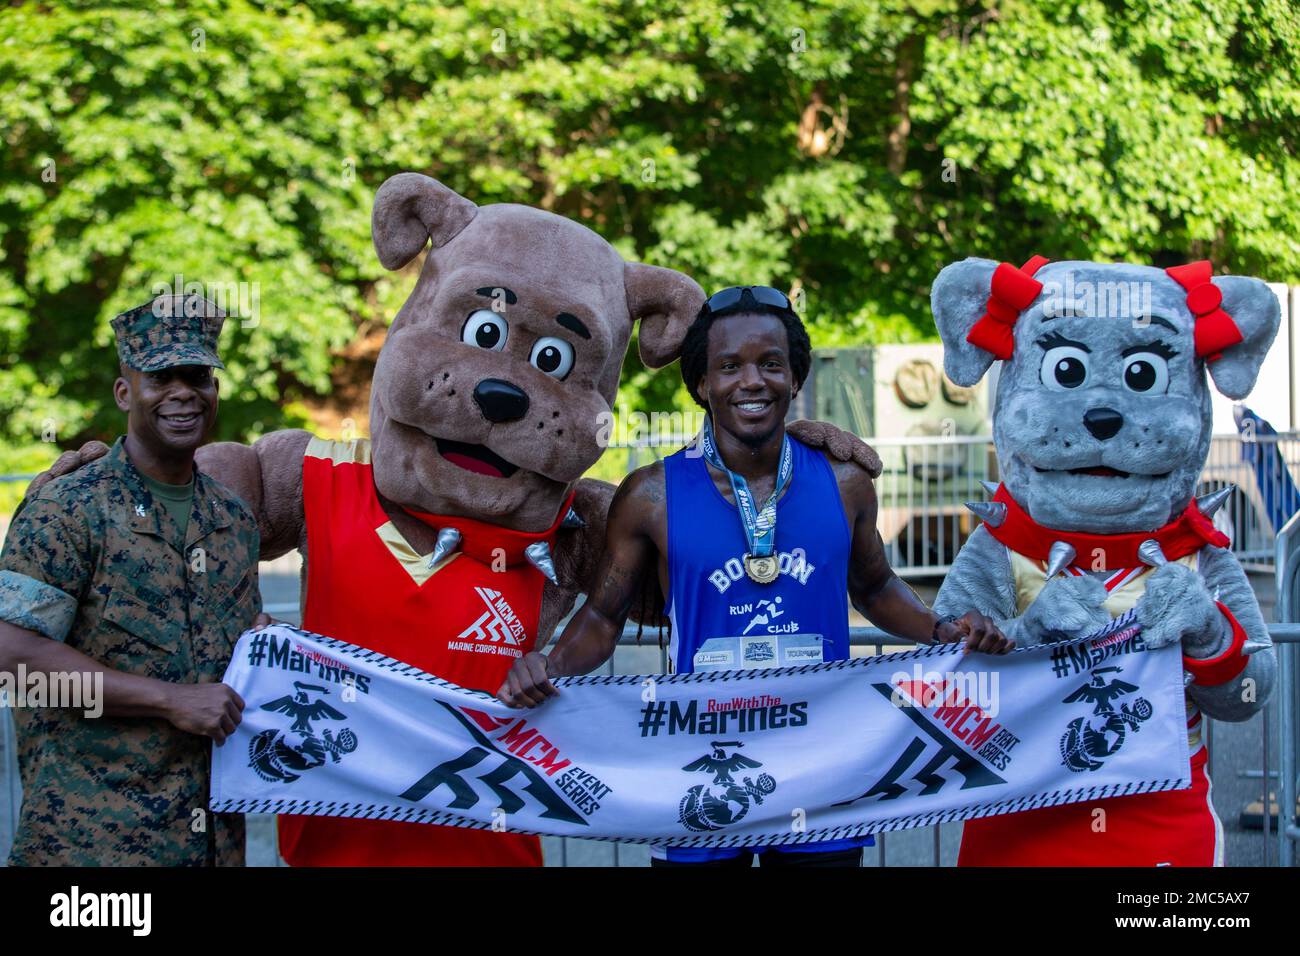 U.S. Marine Corps Colonel Michael L. Brooks, commanding officer, Marine Corps Base Quantico, poses with the Marine Corps Marathon mascots and a runner for a photo at the Marine Corps Marathon Belleau Wood 8k and Crossroads Trail 15k on Marine Corps Base Quantico, Virginia, June 25, 2022. The events challenge runners and their individual tenacity as they ran through the woods of MCB Quantico. Stock Photo